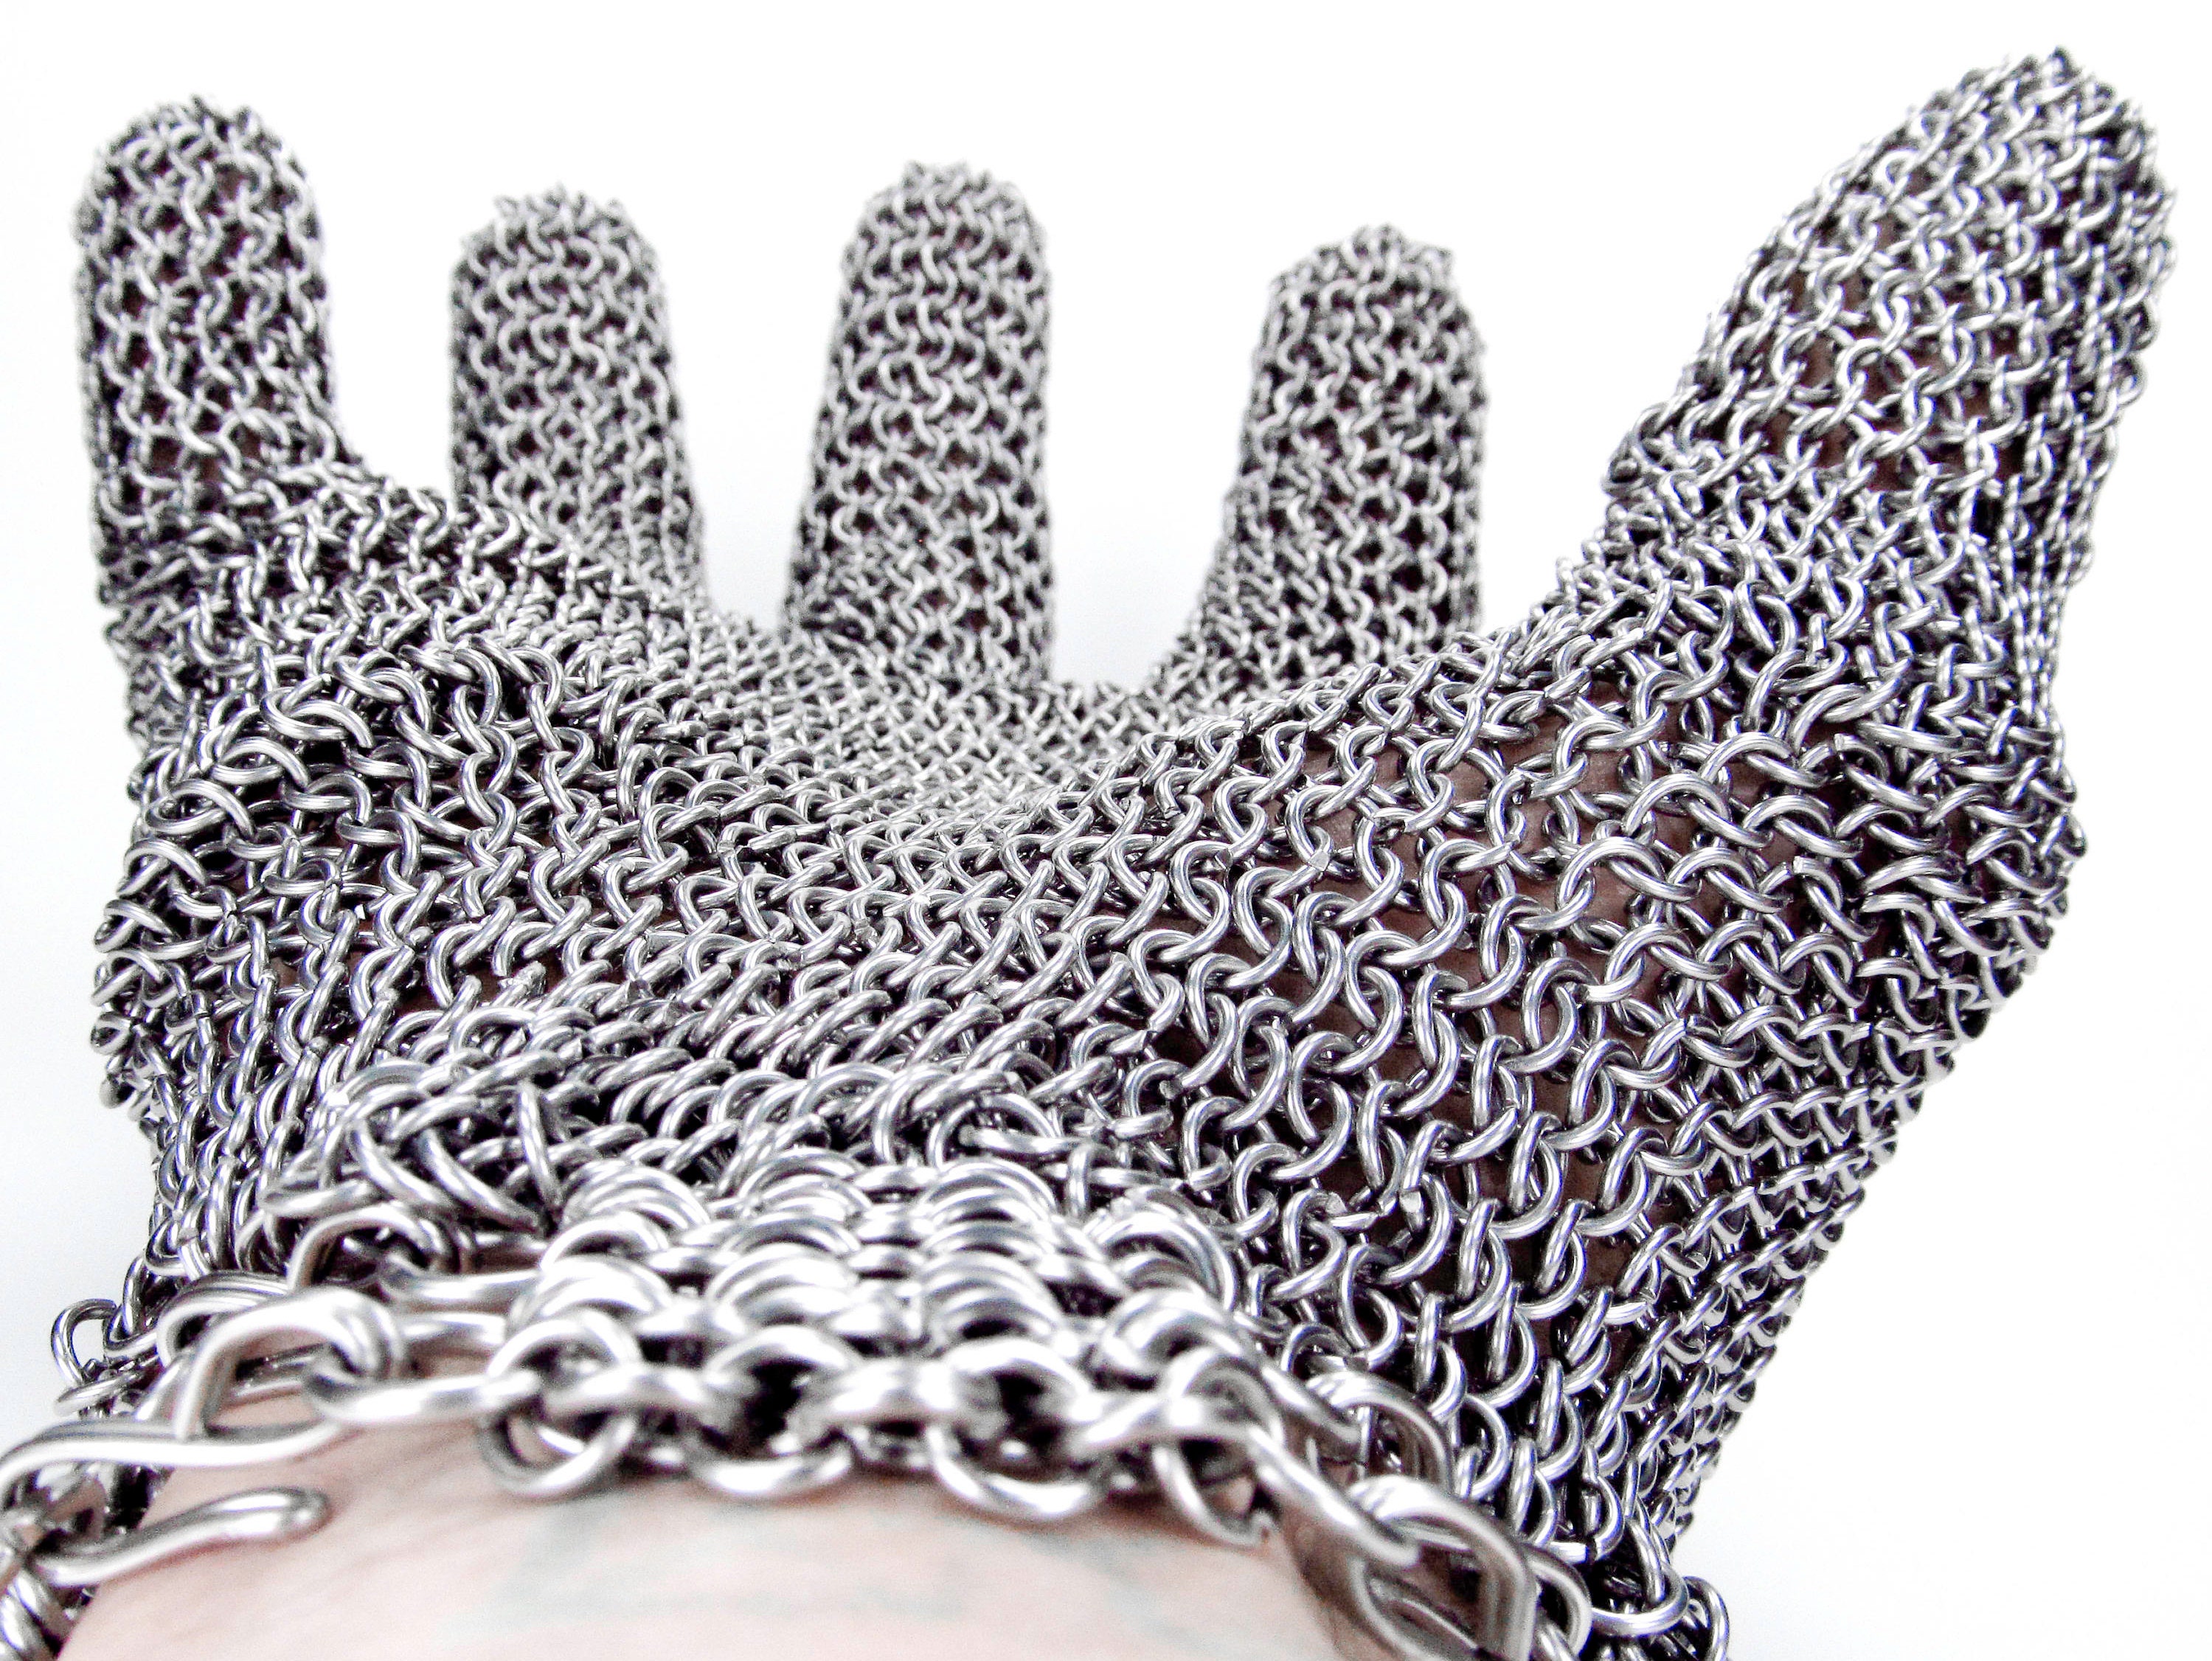 Falconiere Mid Length Gloves - Pair of Brass Chainmail Fingerless Gaun